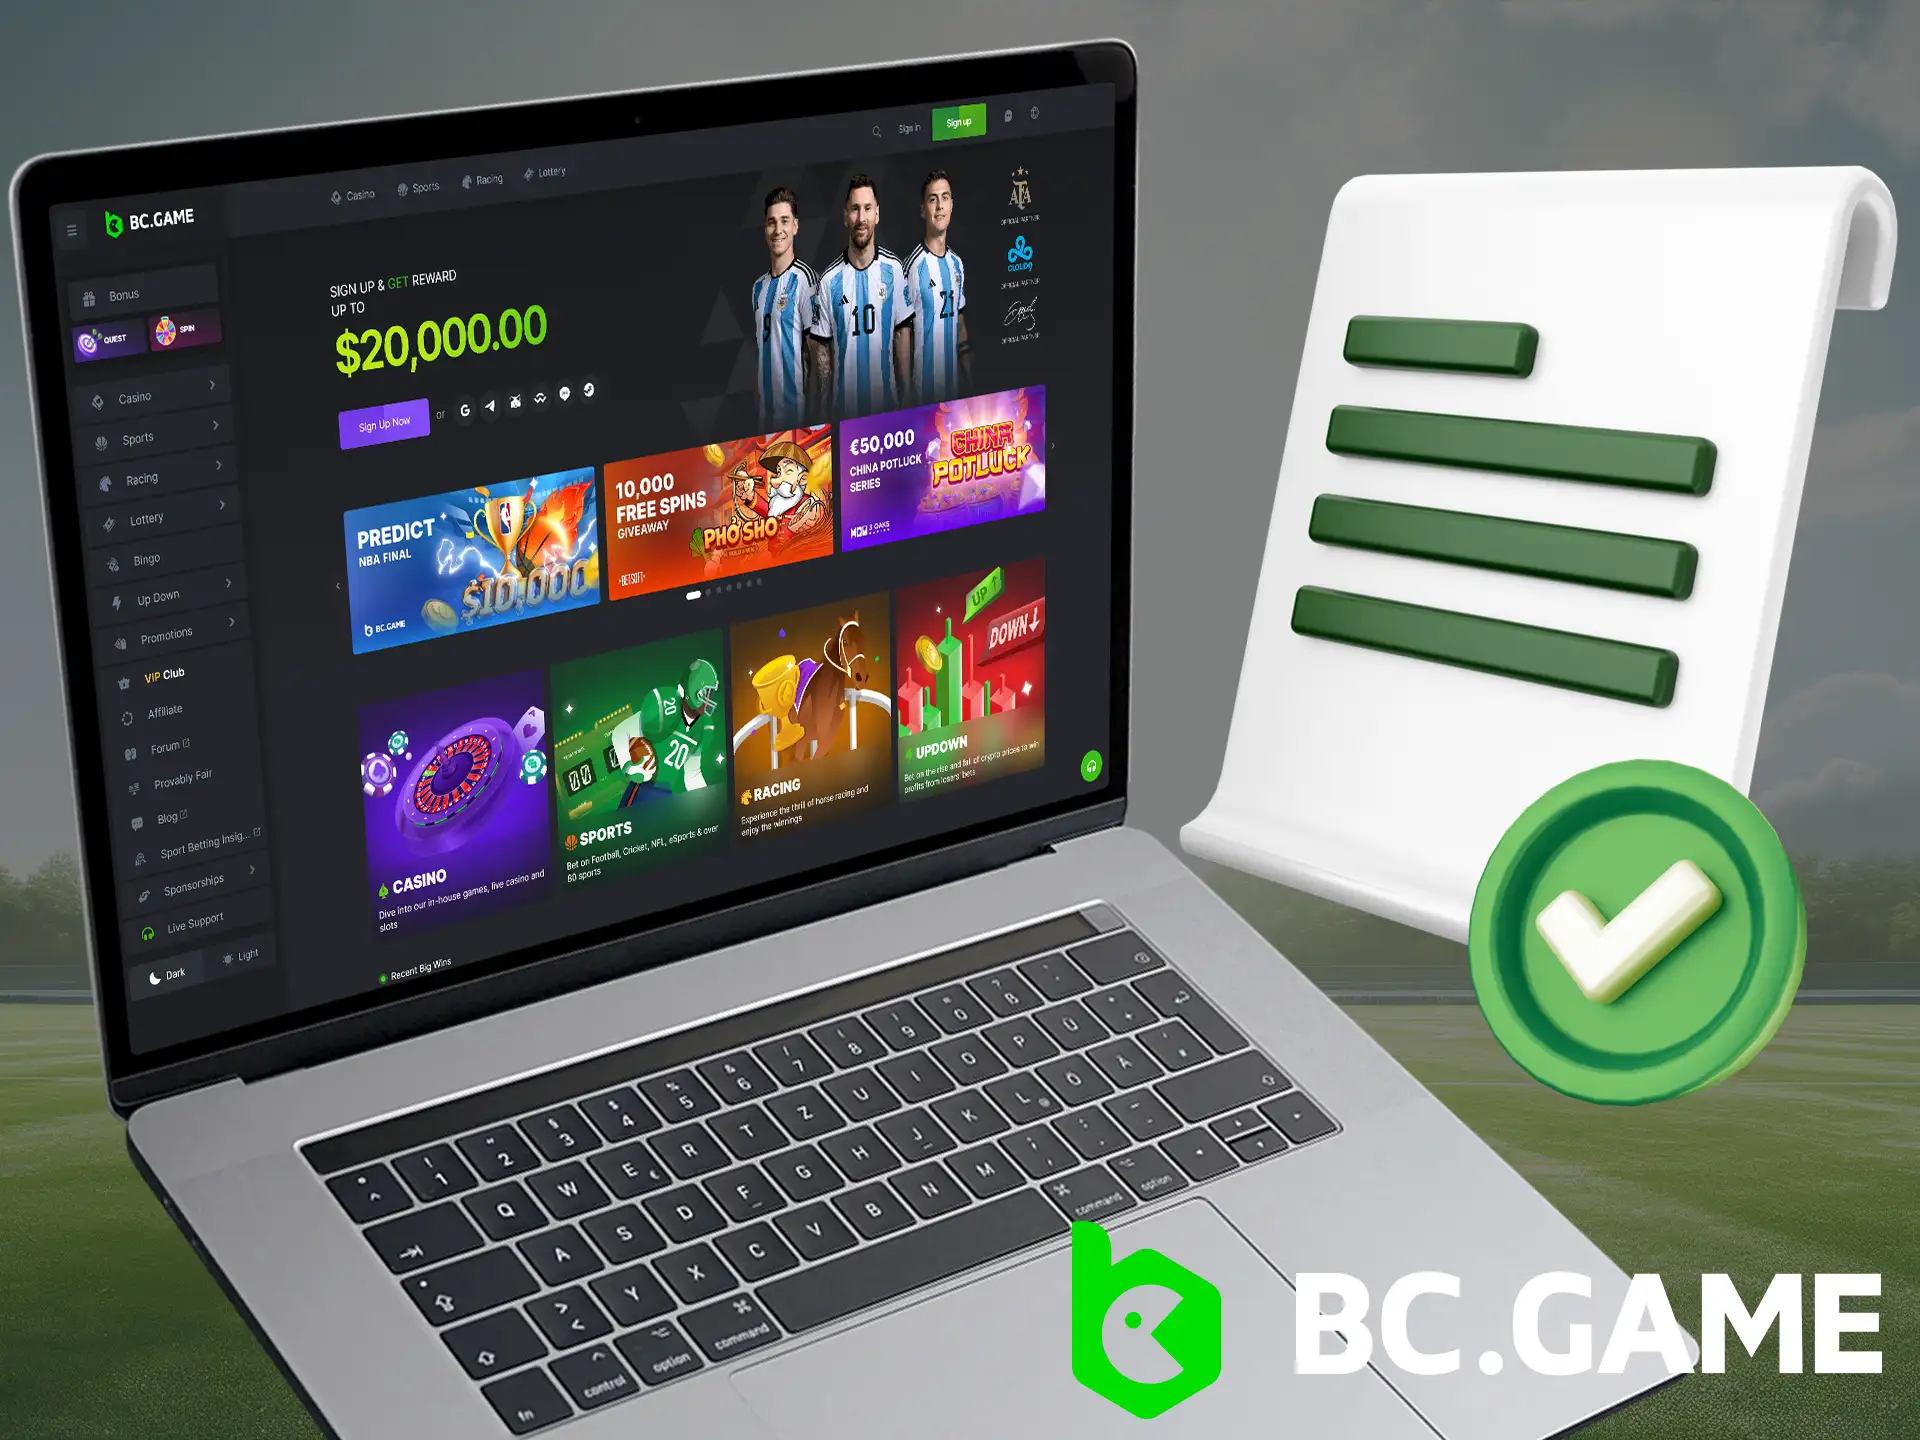 BC Game is completely legal in India, rest assured in this bookmaker and its transparency in financial transactions.